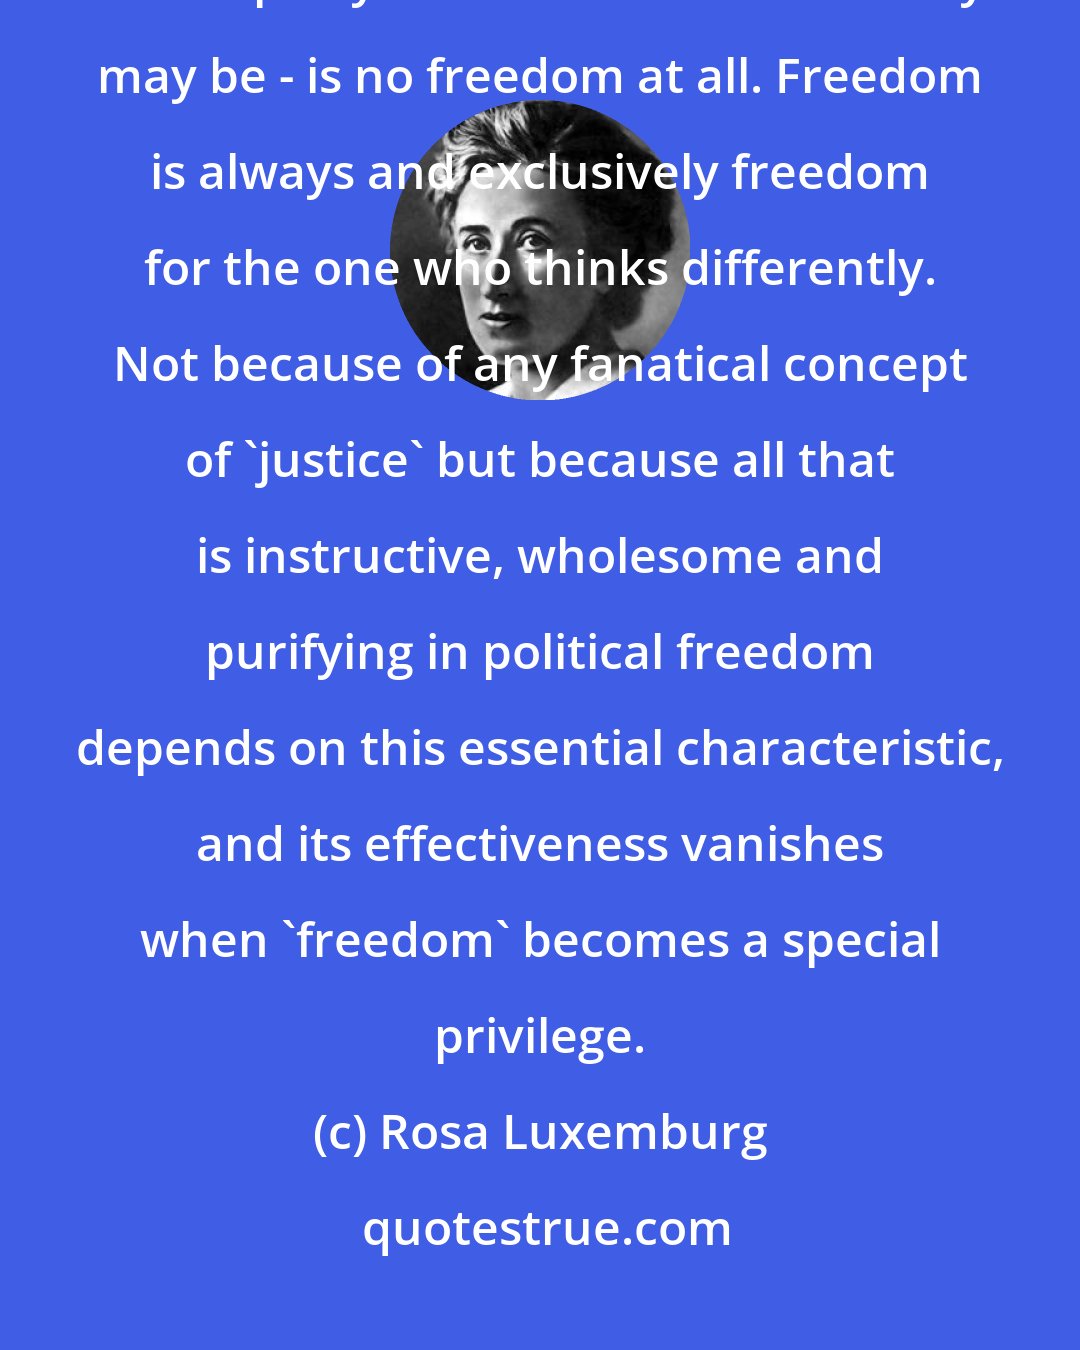 Rosa Luxemburg: Freedom only for supporters of the government, only for the members of one party - however numerous they may be - is no freedom at all. Freedom is always and exclusively freedom for the one who thinks differently. Not because of any fanatical concept of 'justice' but because all that is instructive, wholesome and purifying in political freedom depends on this essential characteristic, and its effectiveness vanishes when 'freedom' becomes a special privilege.